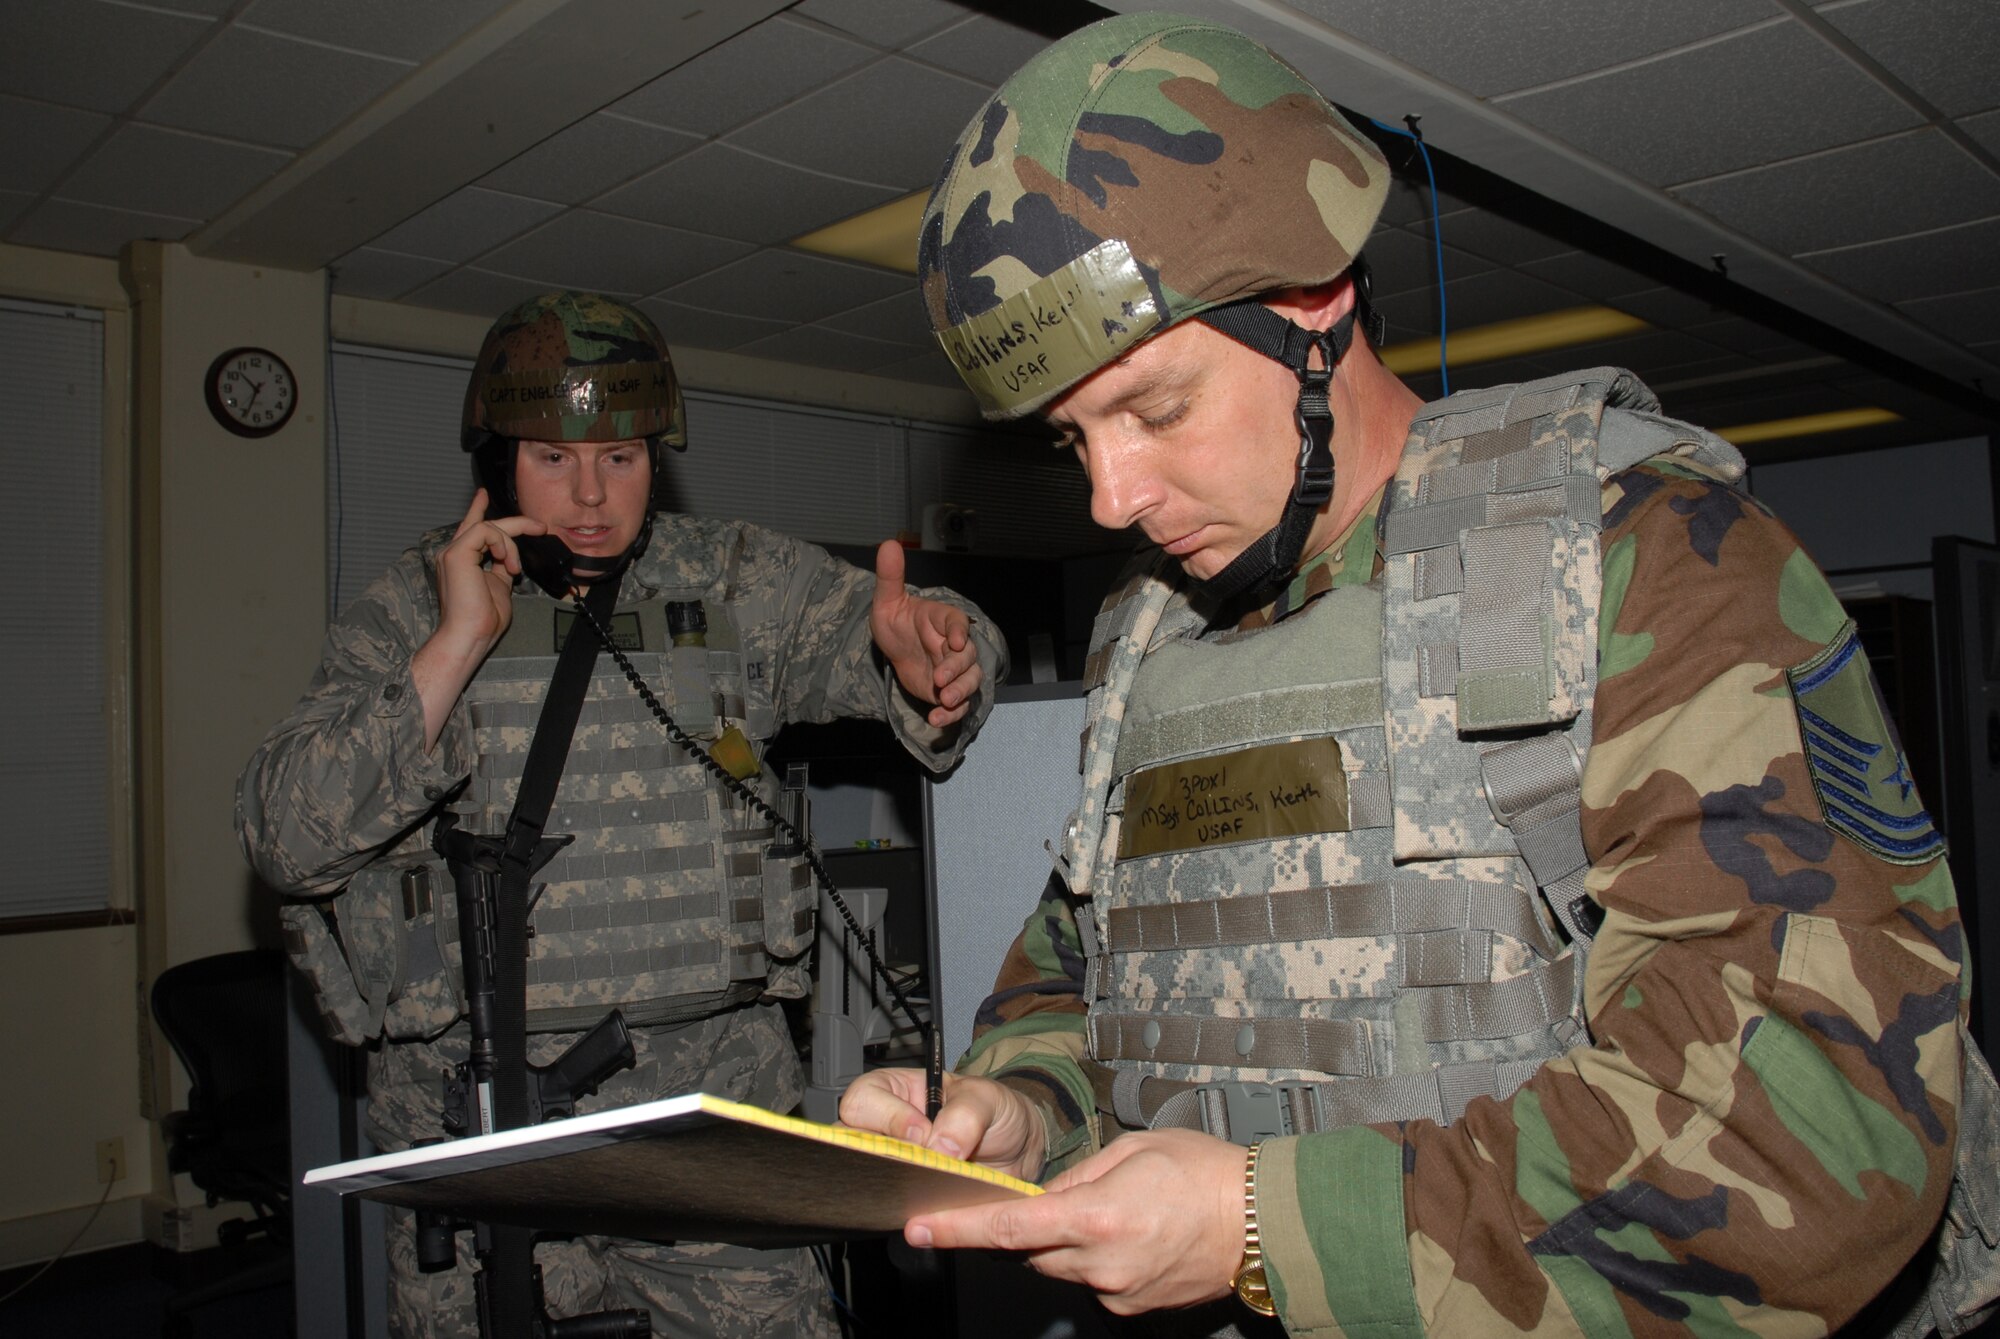 Capt. William Englebert, relays pertinent information to the law enforcement desk that Master Sgt. Keith Collins has received from the perpetrator of a hostile situation scenario at the 18th Comptroller Squadron building, during the 2008 Pacific Air Forces Operational Readiness Inspection at Kadena Air Base, Japan, March 11, 2008. PACAF is conducting the inspection from March 9 to 15 to validate the mission readiness of the 18th Wing. Both Captain Englebert and Sergeant Collins are from the 18th Security Forces Squadron. (U.S. Air Force photo/Staff Sgt. Chrissy FitzGerald)